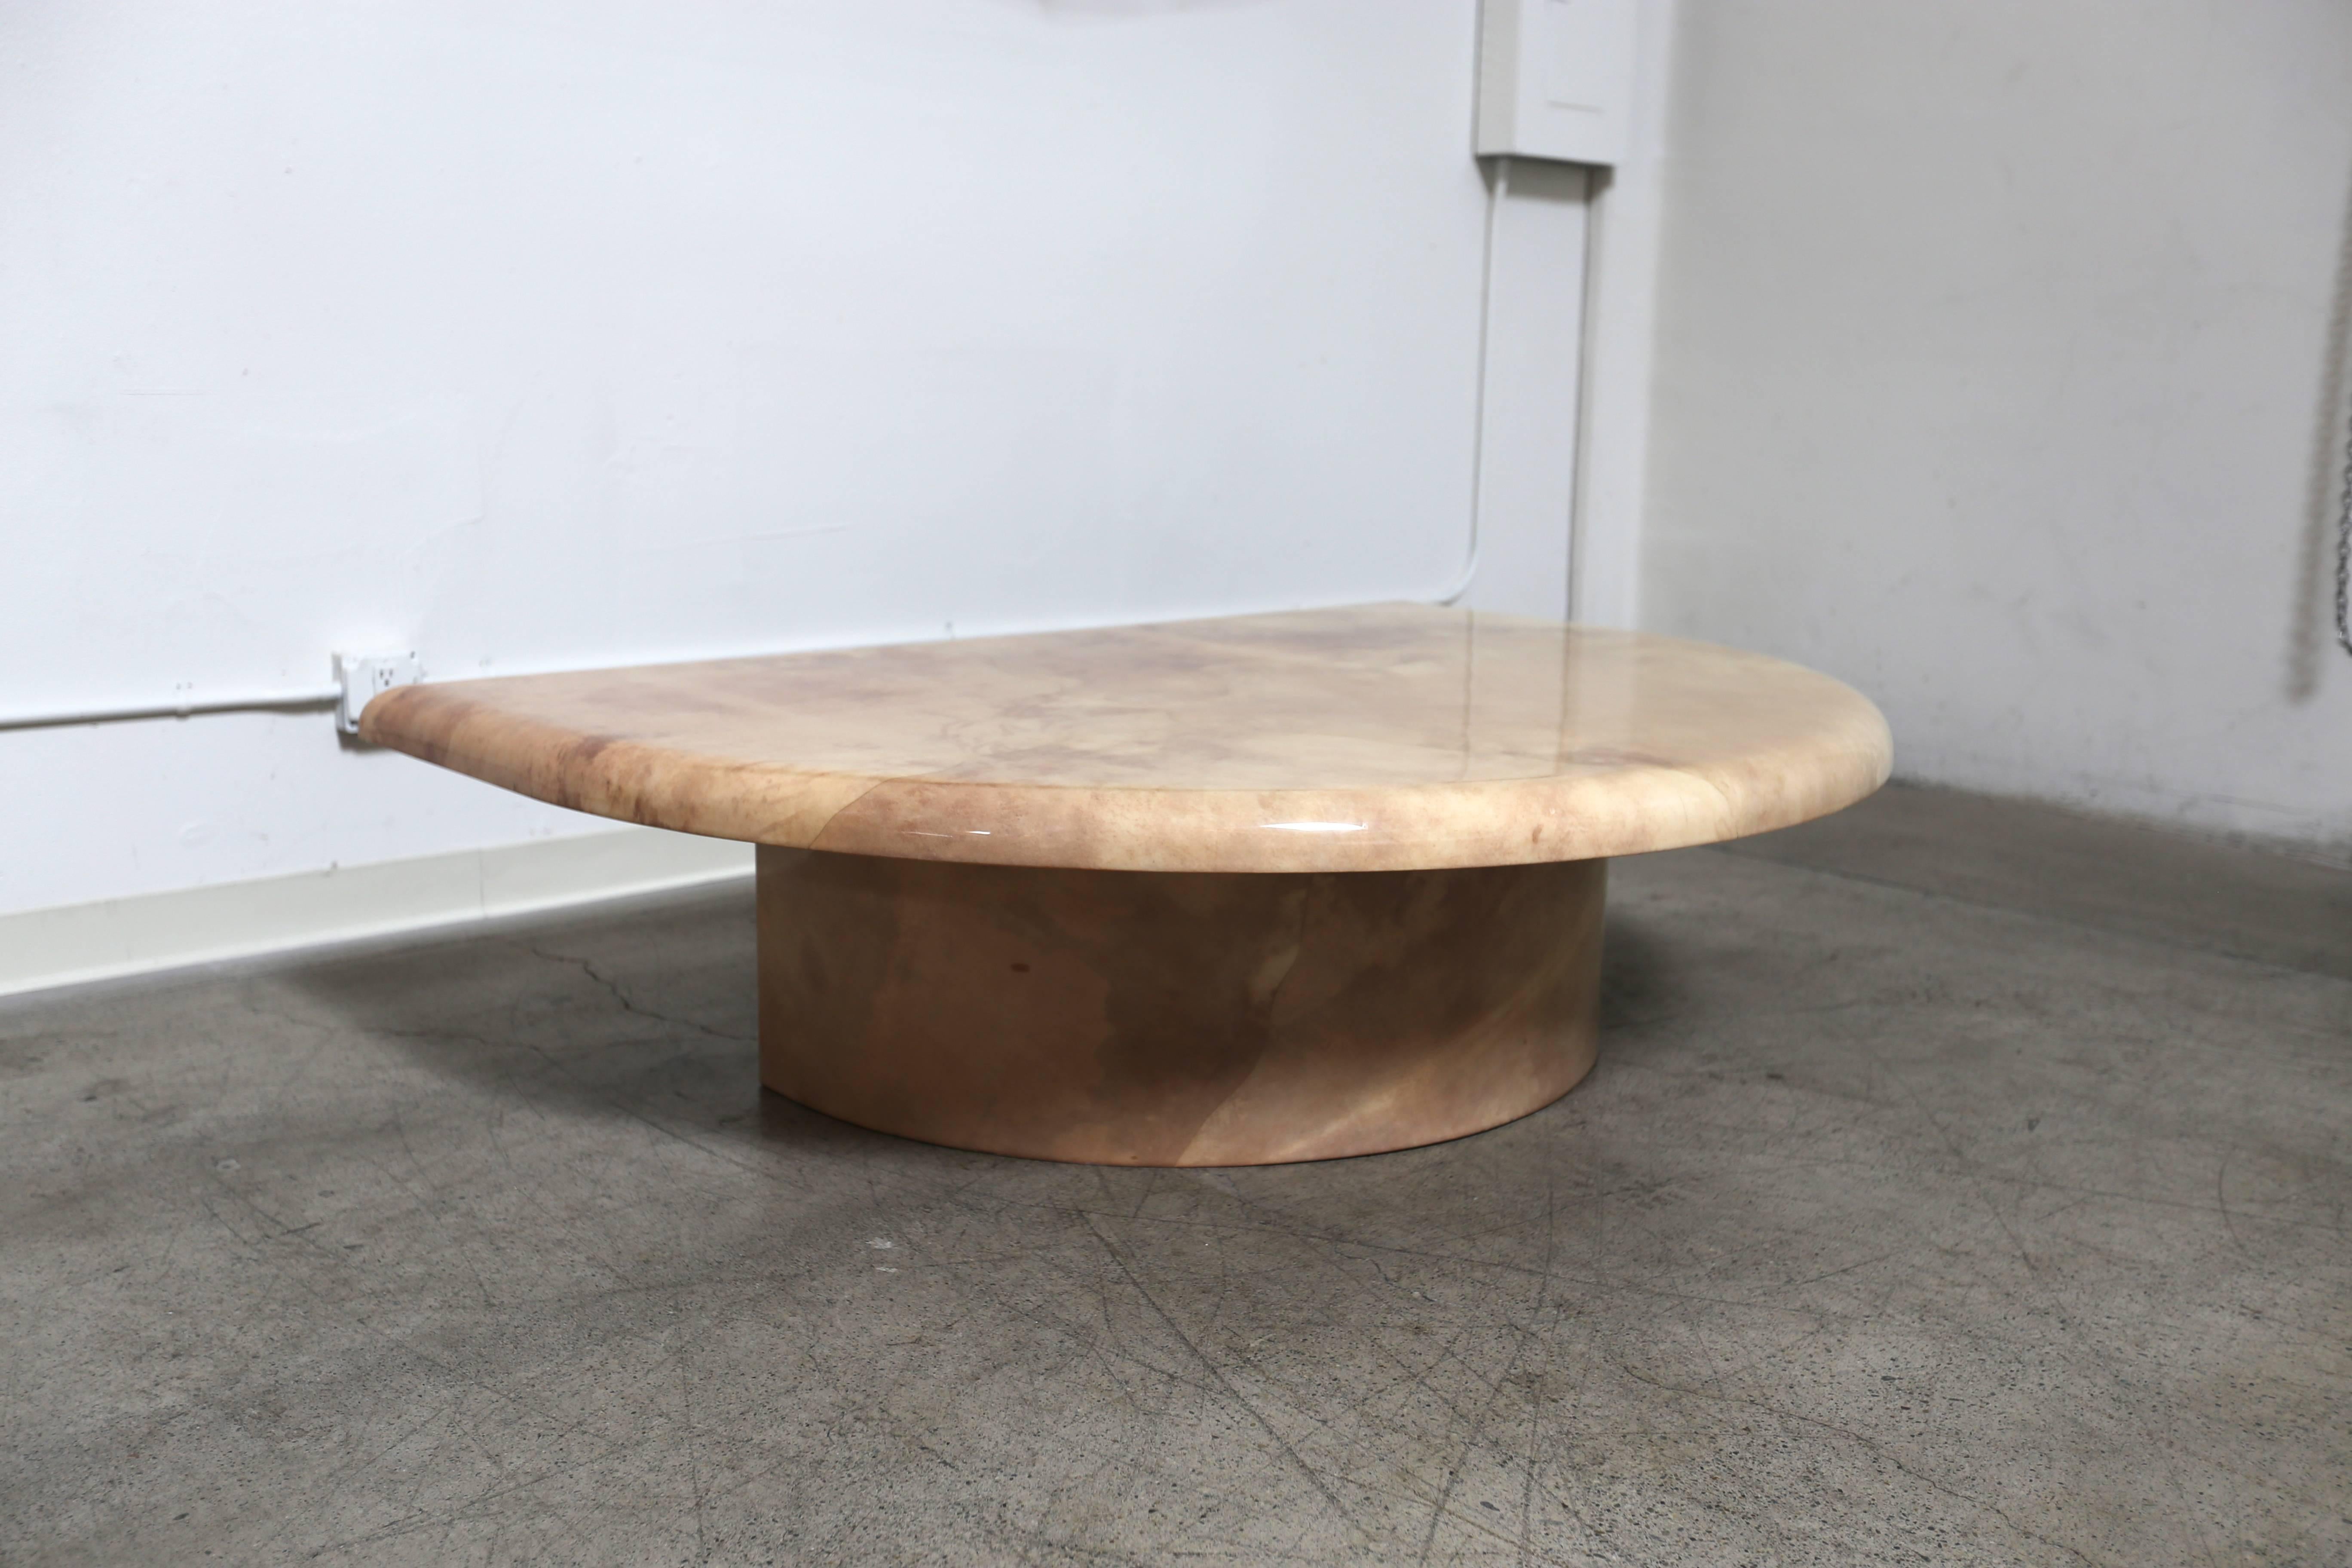 Lacquered Goatskin Coffee Table from a Architect Ed Lohrbach Interior  3